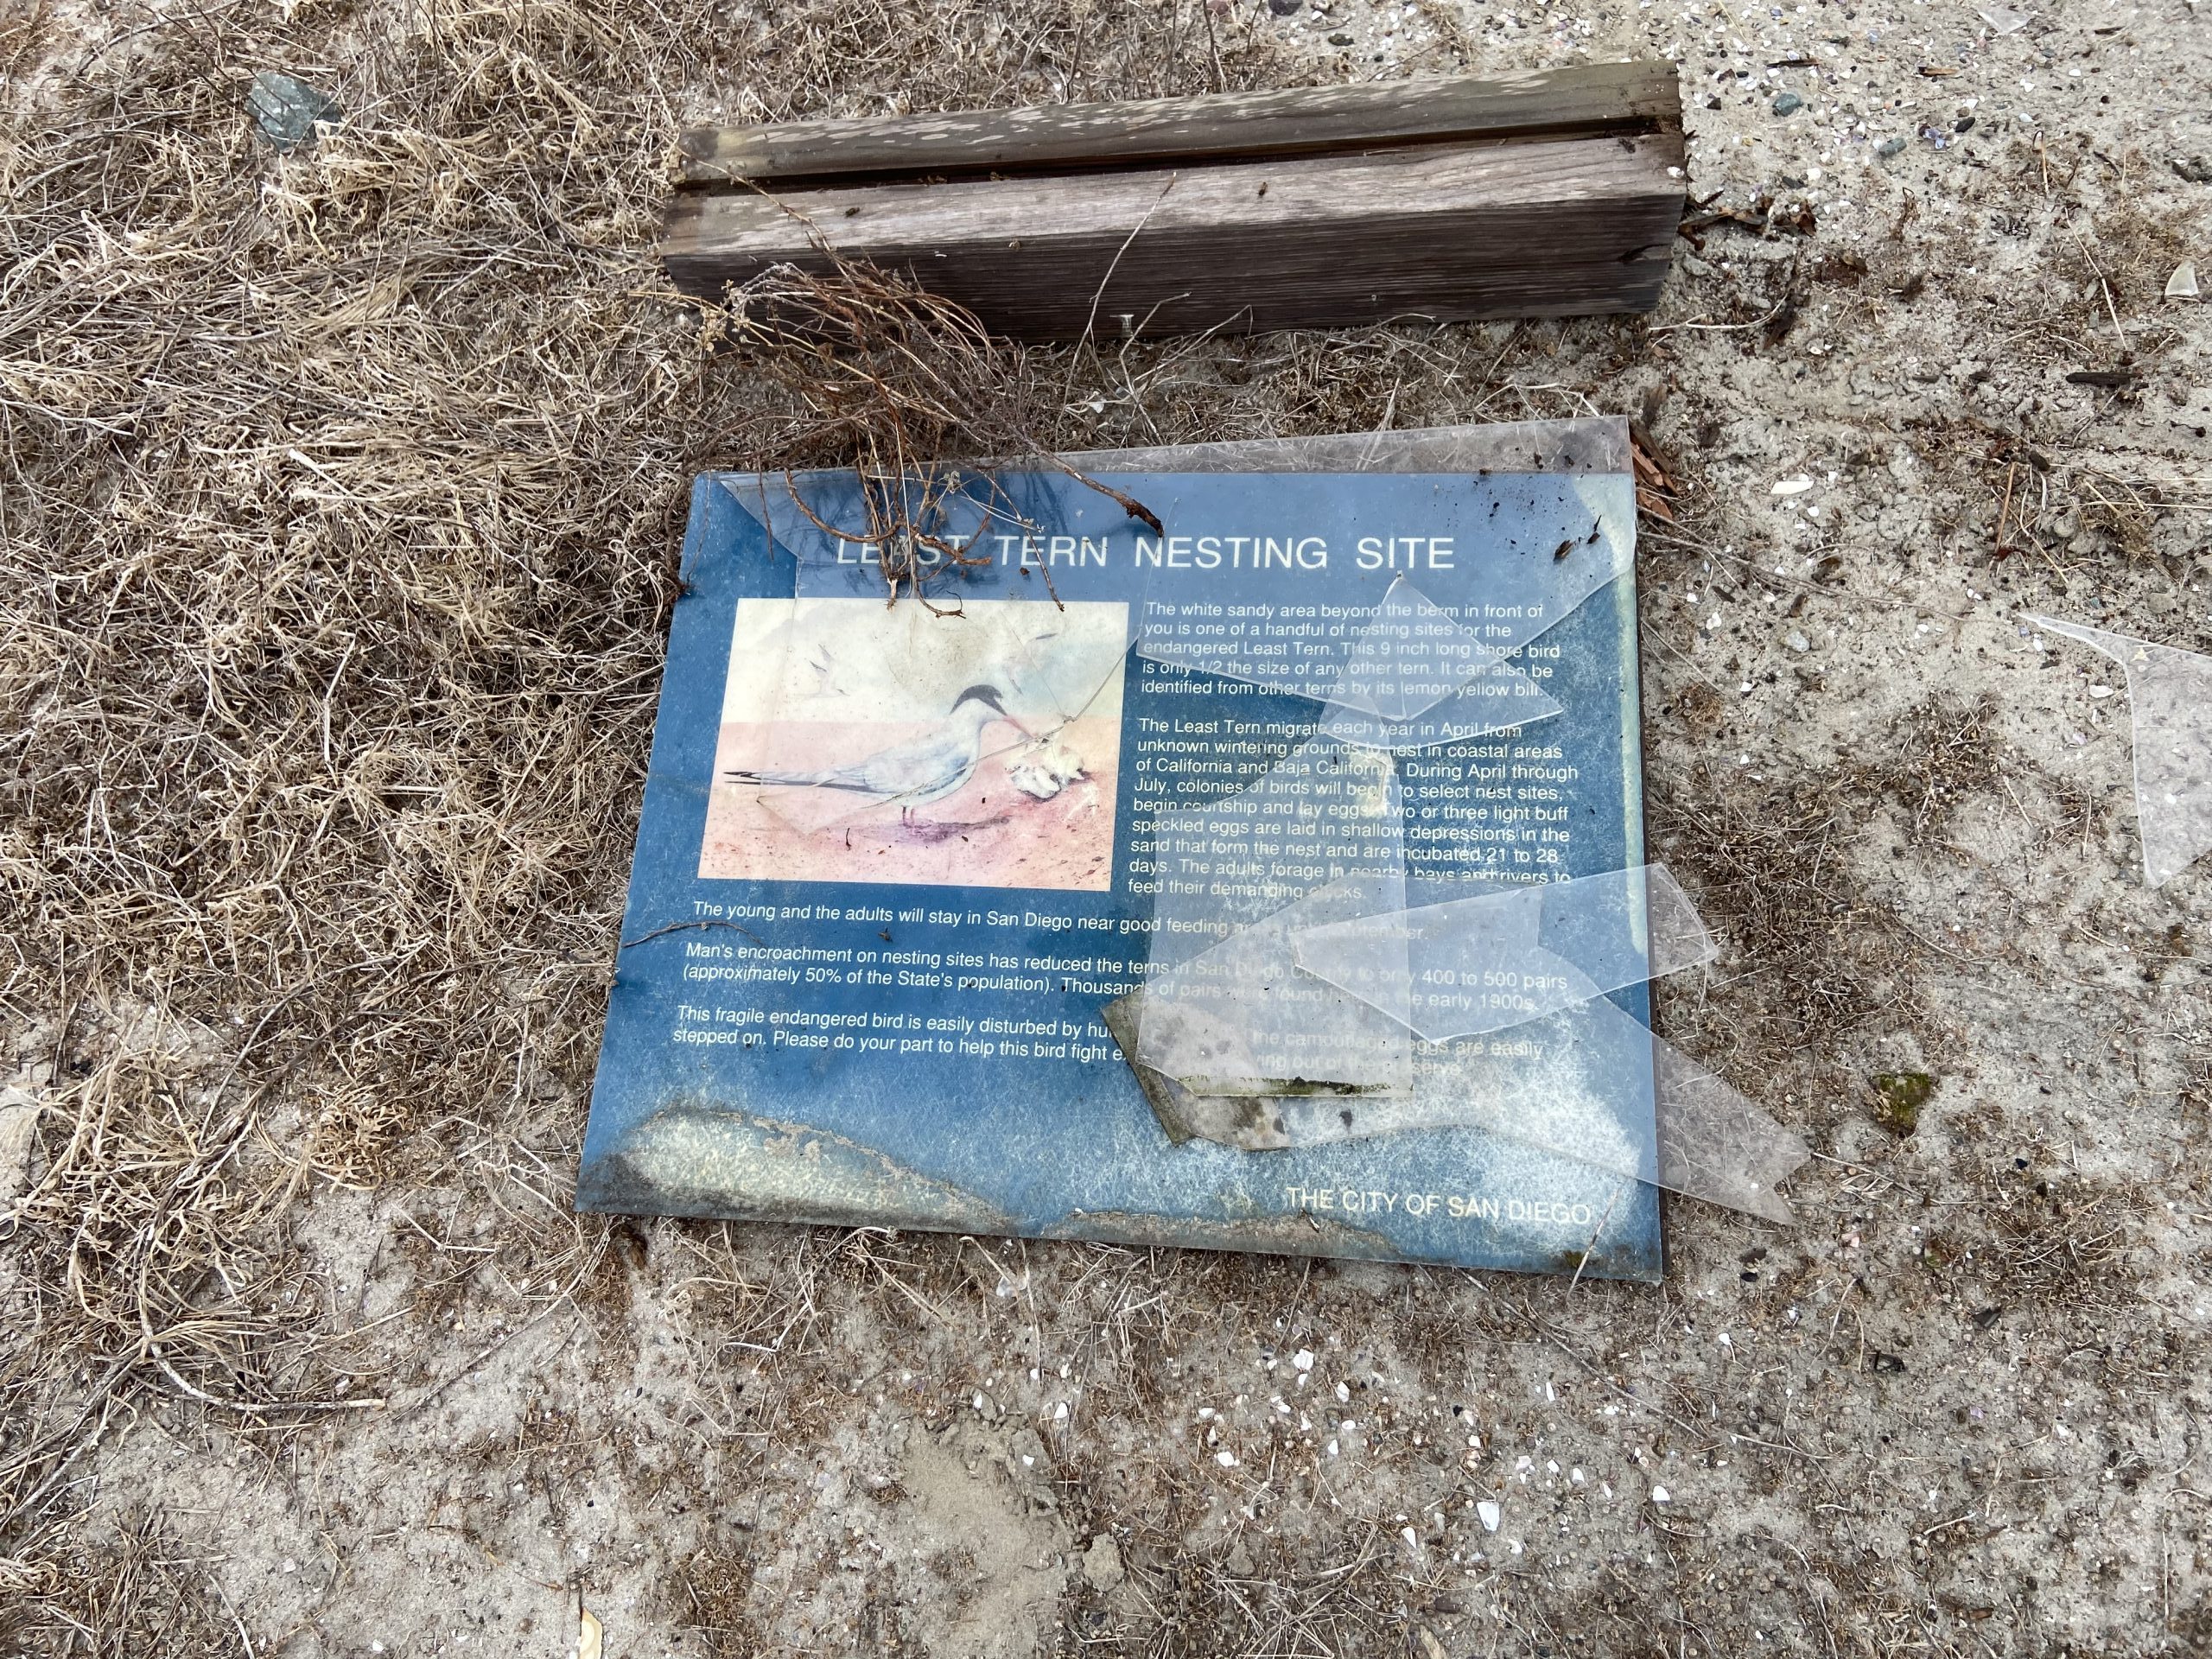 Environment Report: Vandals Wreck Endangered Bird Nesting Site in Mission Bay